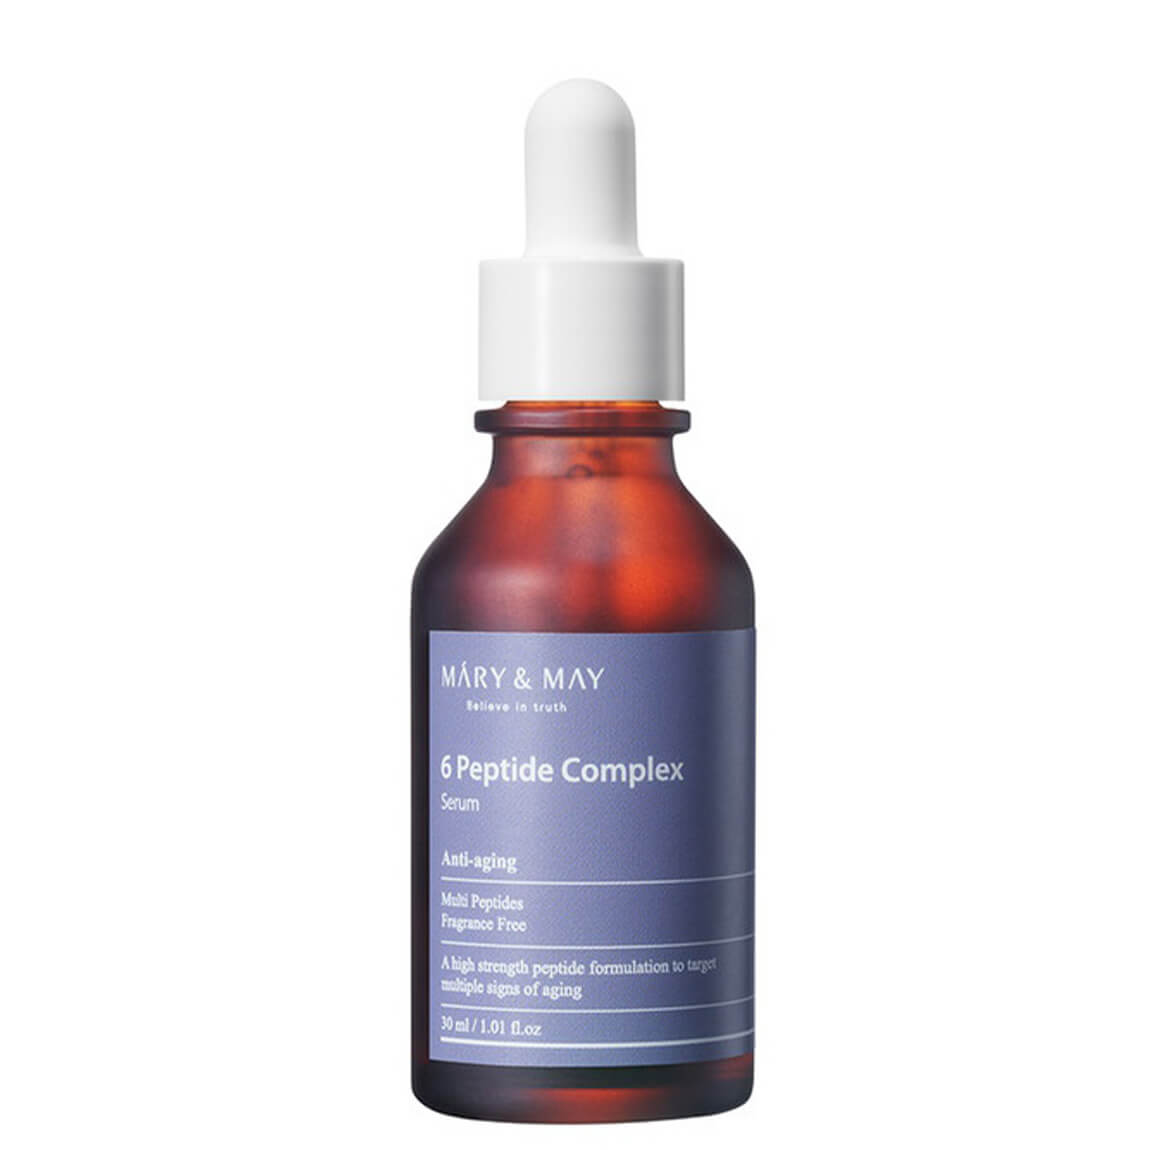 MARY AND MAY 6 Peptide Complex Serum 30ml